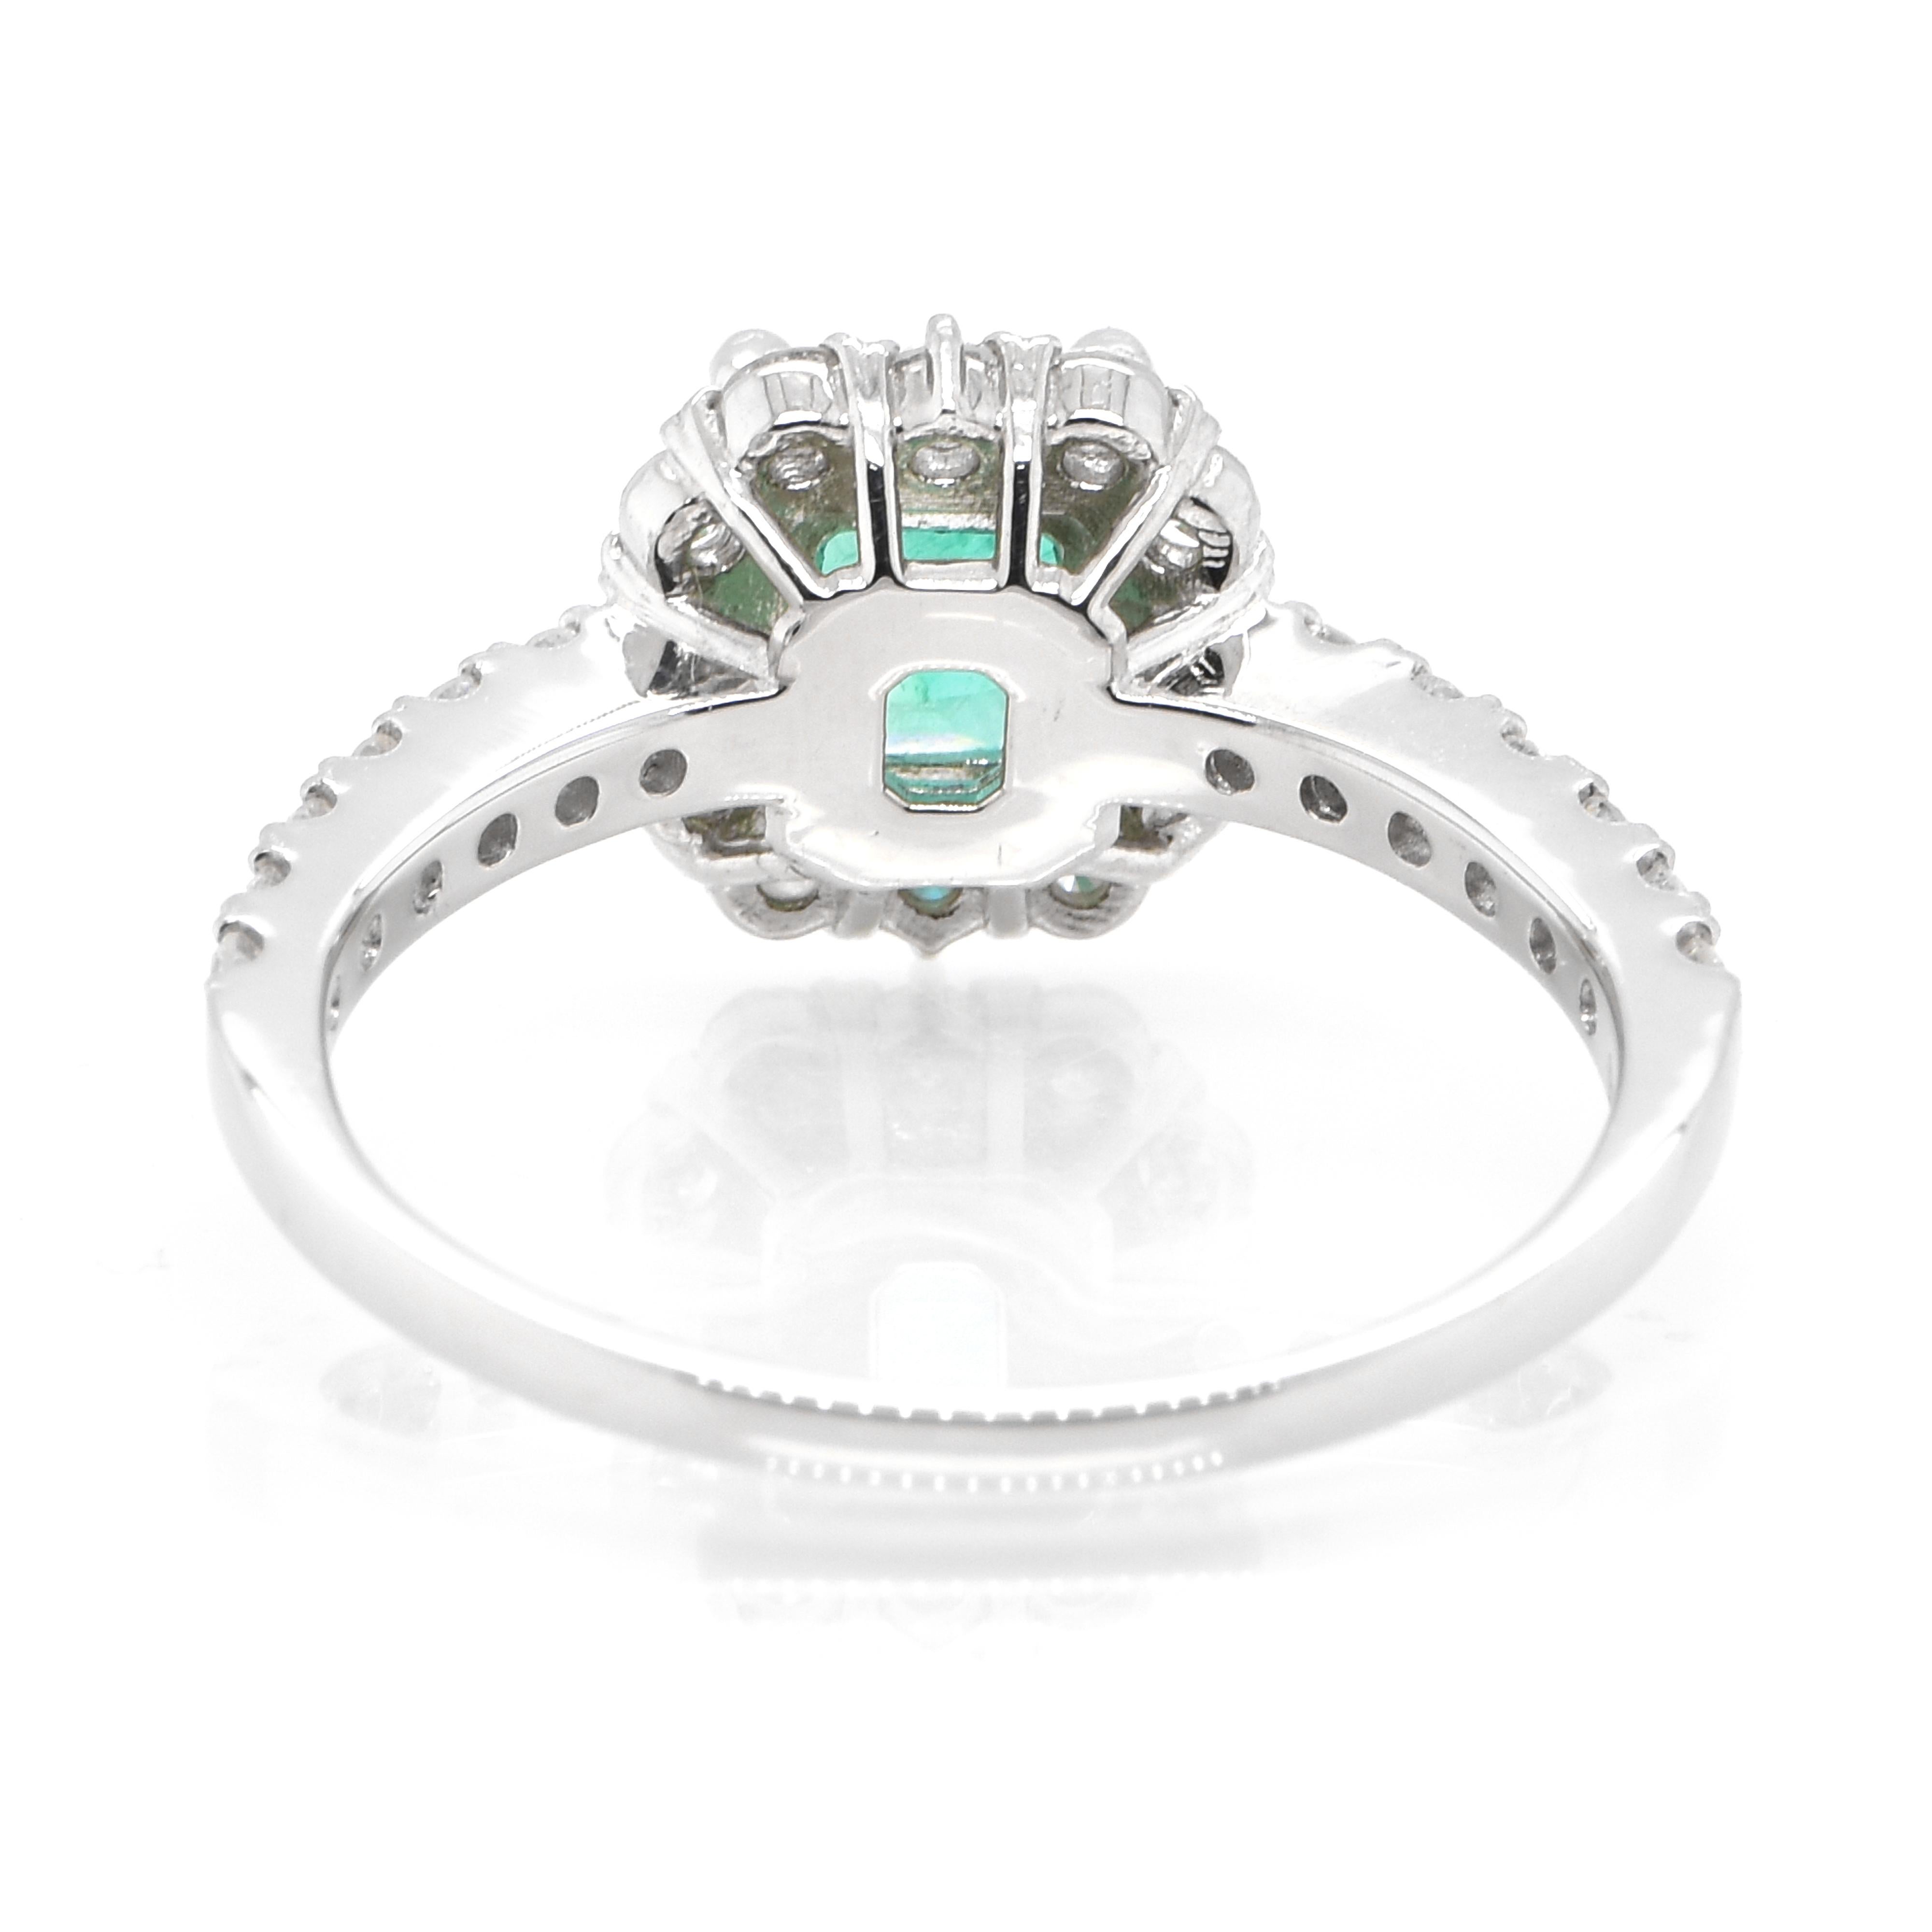 Women's 1.10 Carat Natural Colombian Emerald and Diamond Halo Ring set in Platinum For Sale